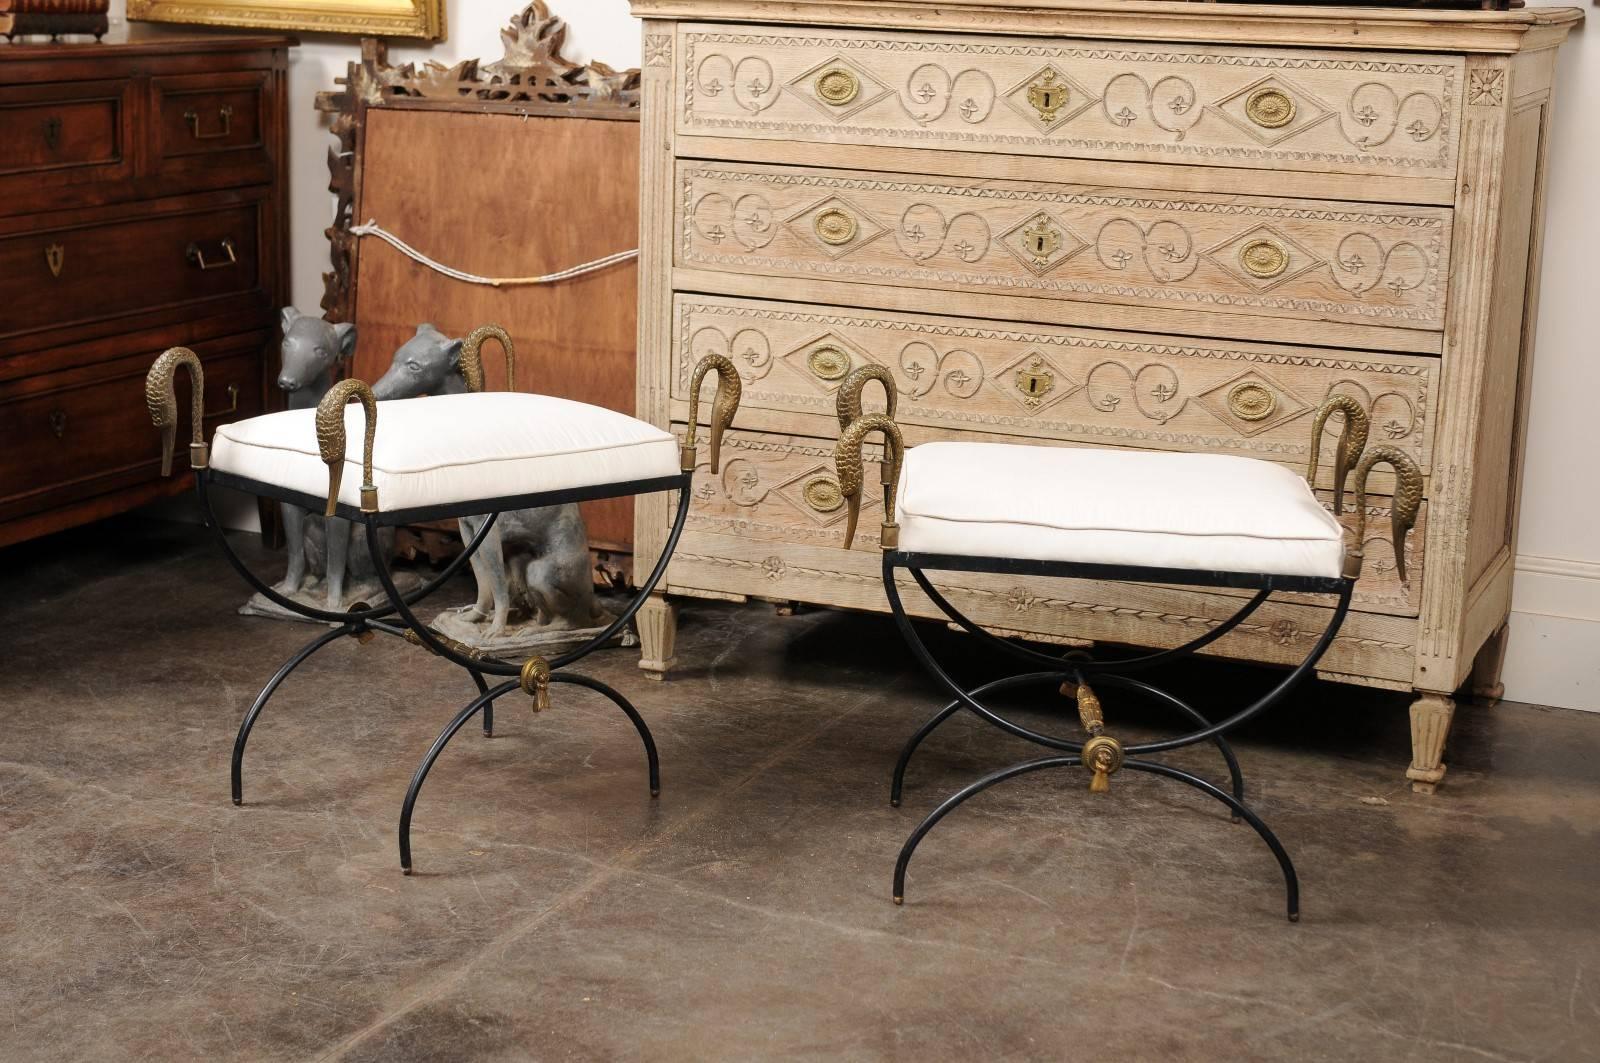 This pair of French neoclassical style stools with brass swans from the mid-20th century features rectangular seats upholstered in a smooth muslin, supported by wrought iron Curule style bases with cross stretchers. The arms are adorned with